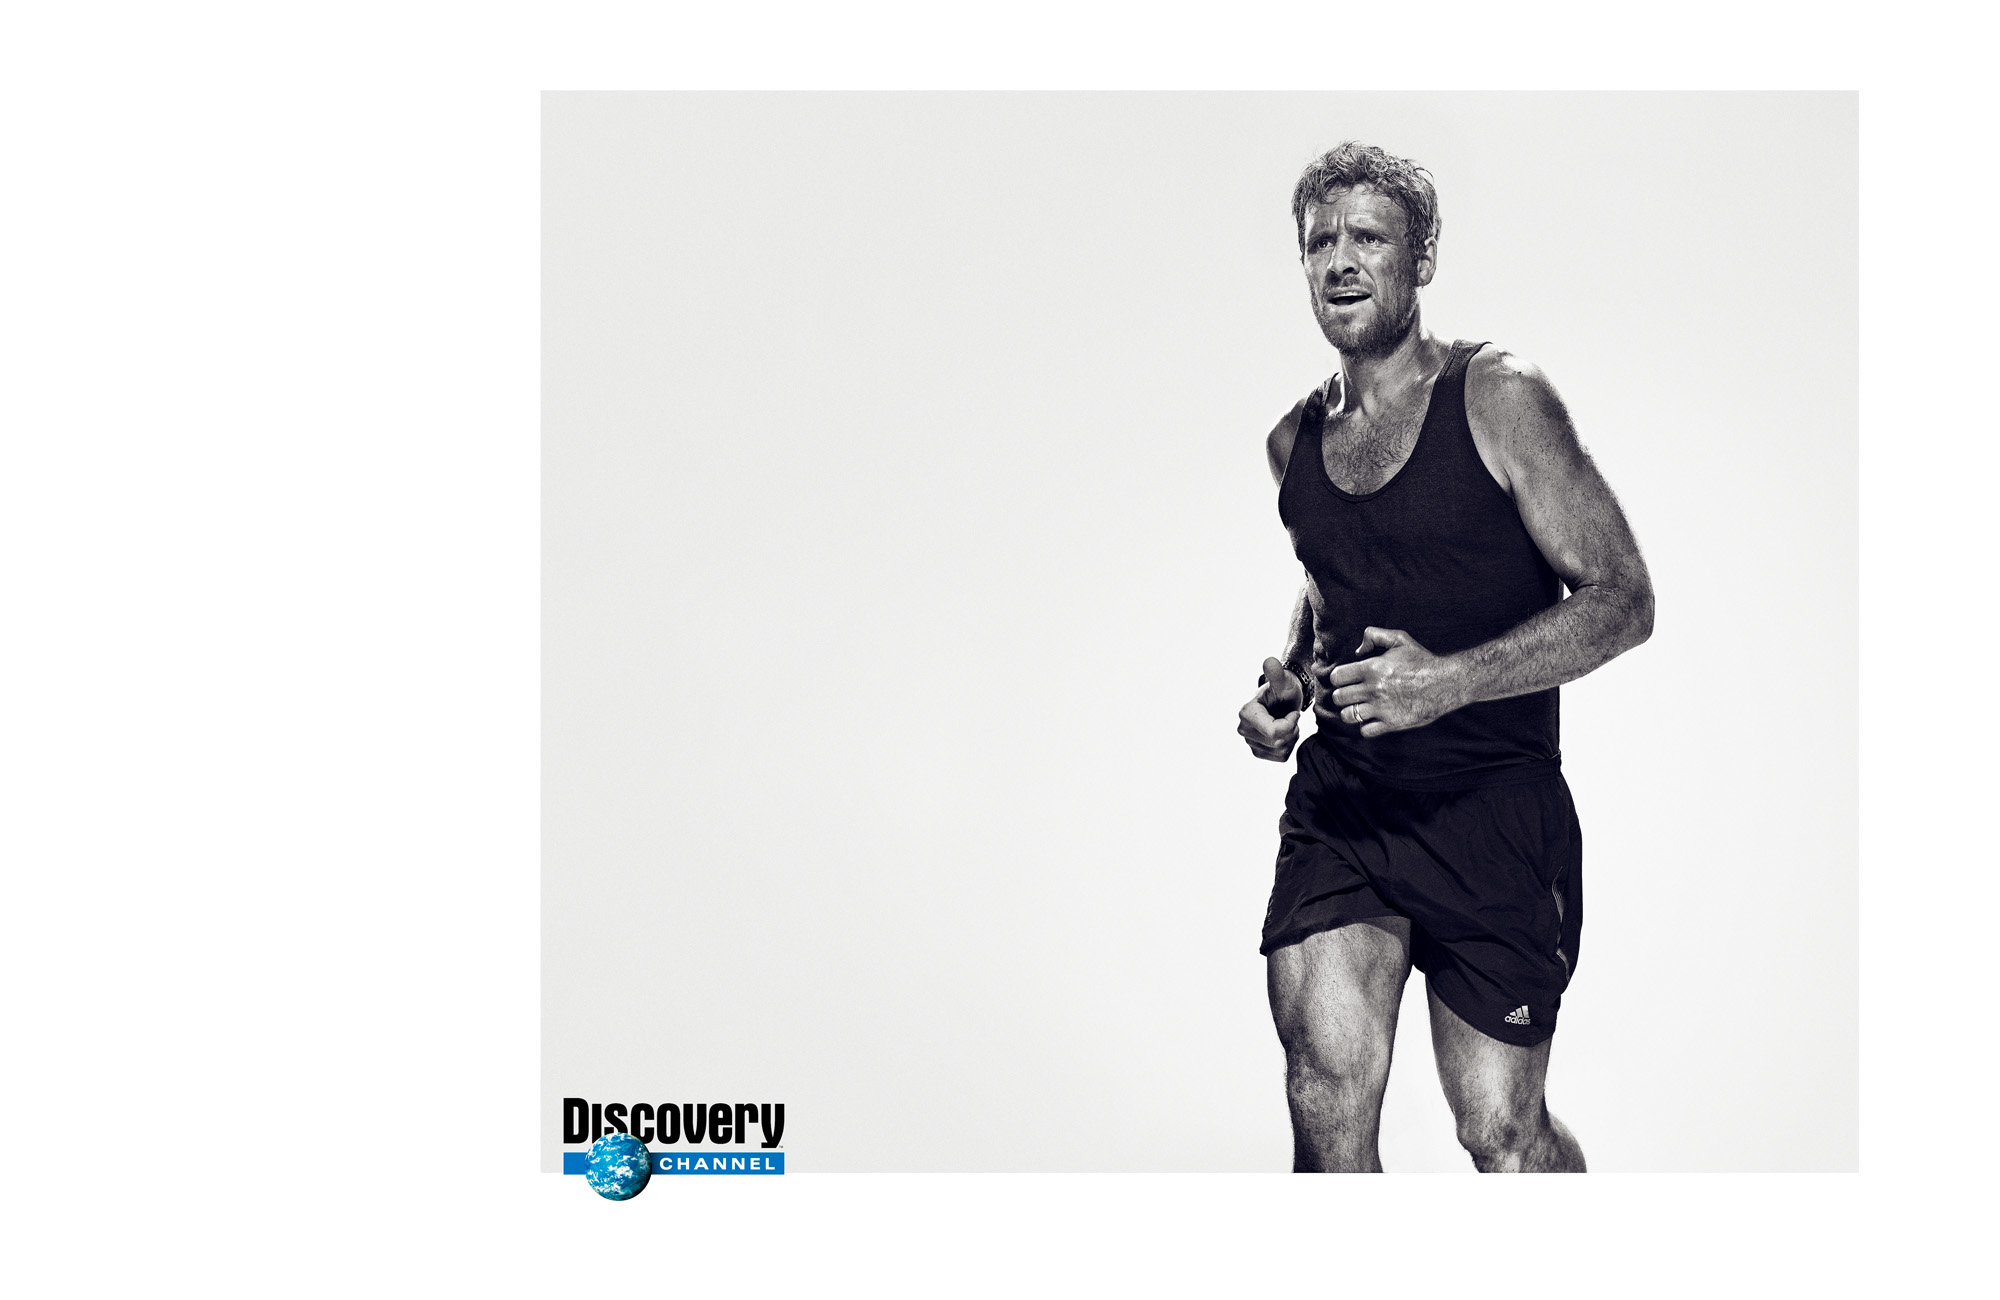 Discovery channel – James Cracknell - 1 of 2